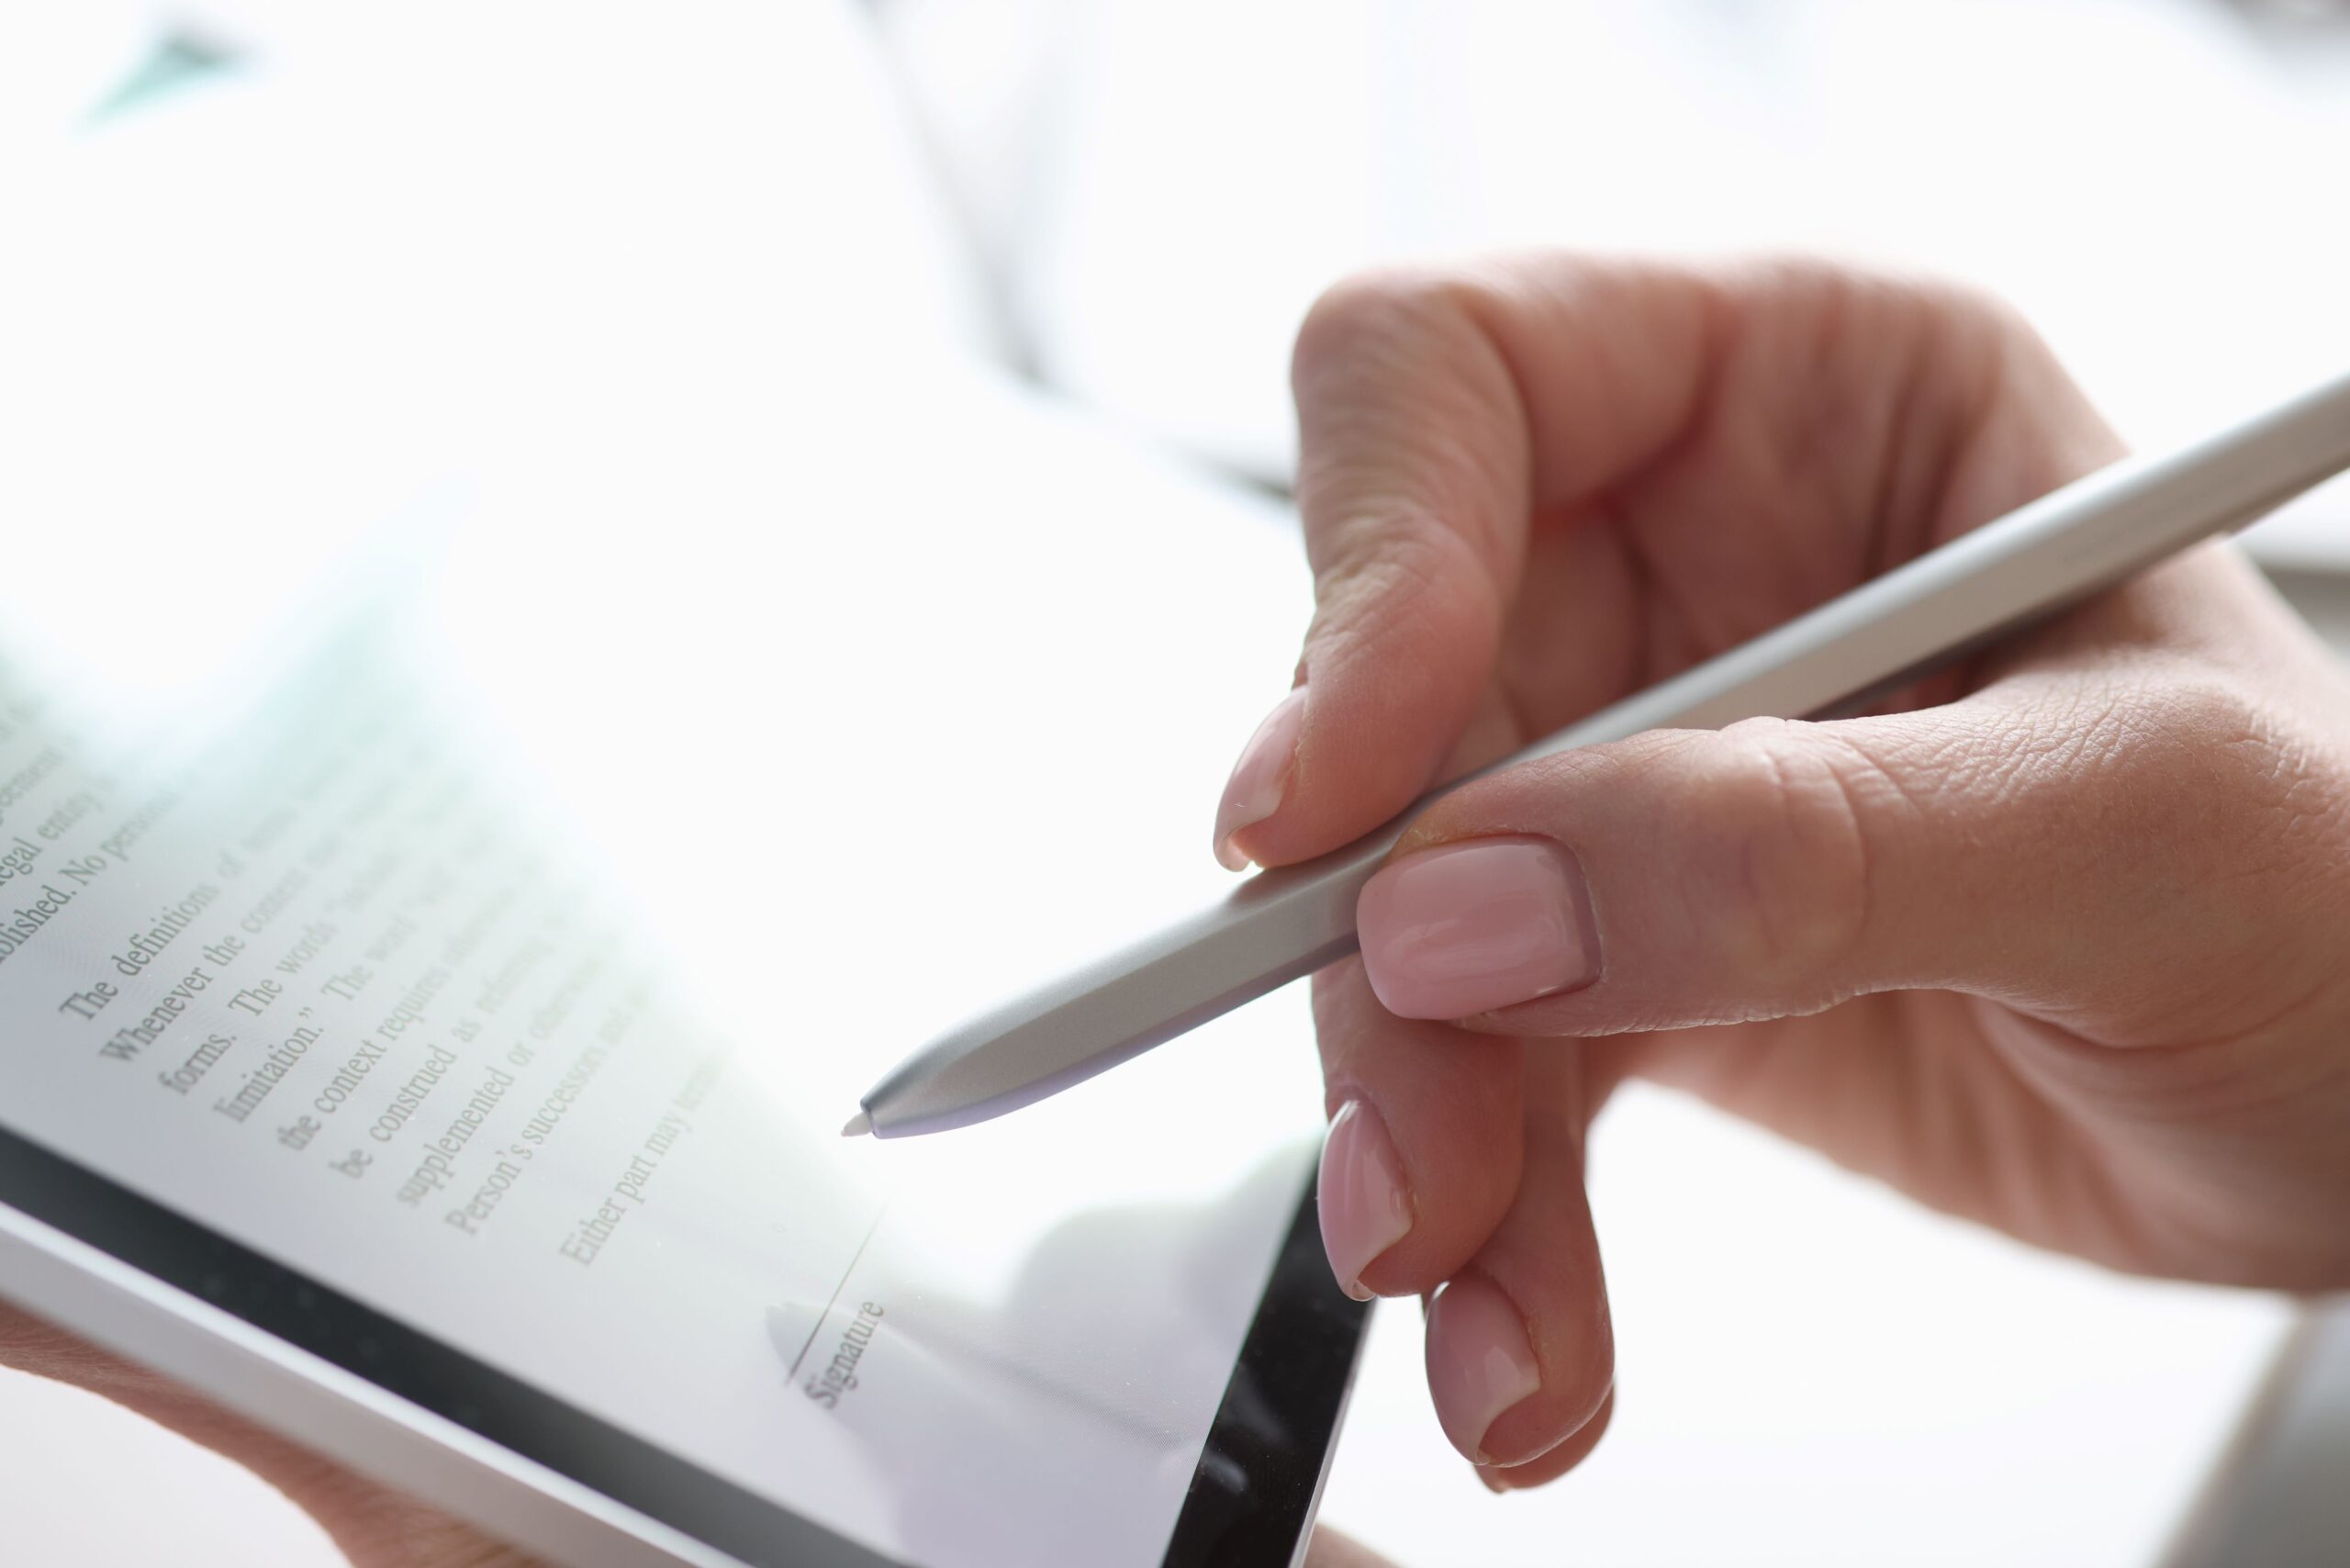 A ladies hand holds a silver pen in front off an iPad.